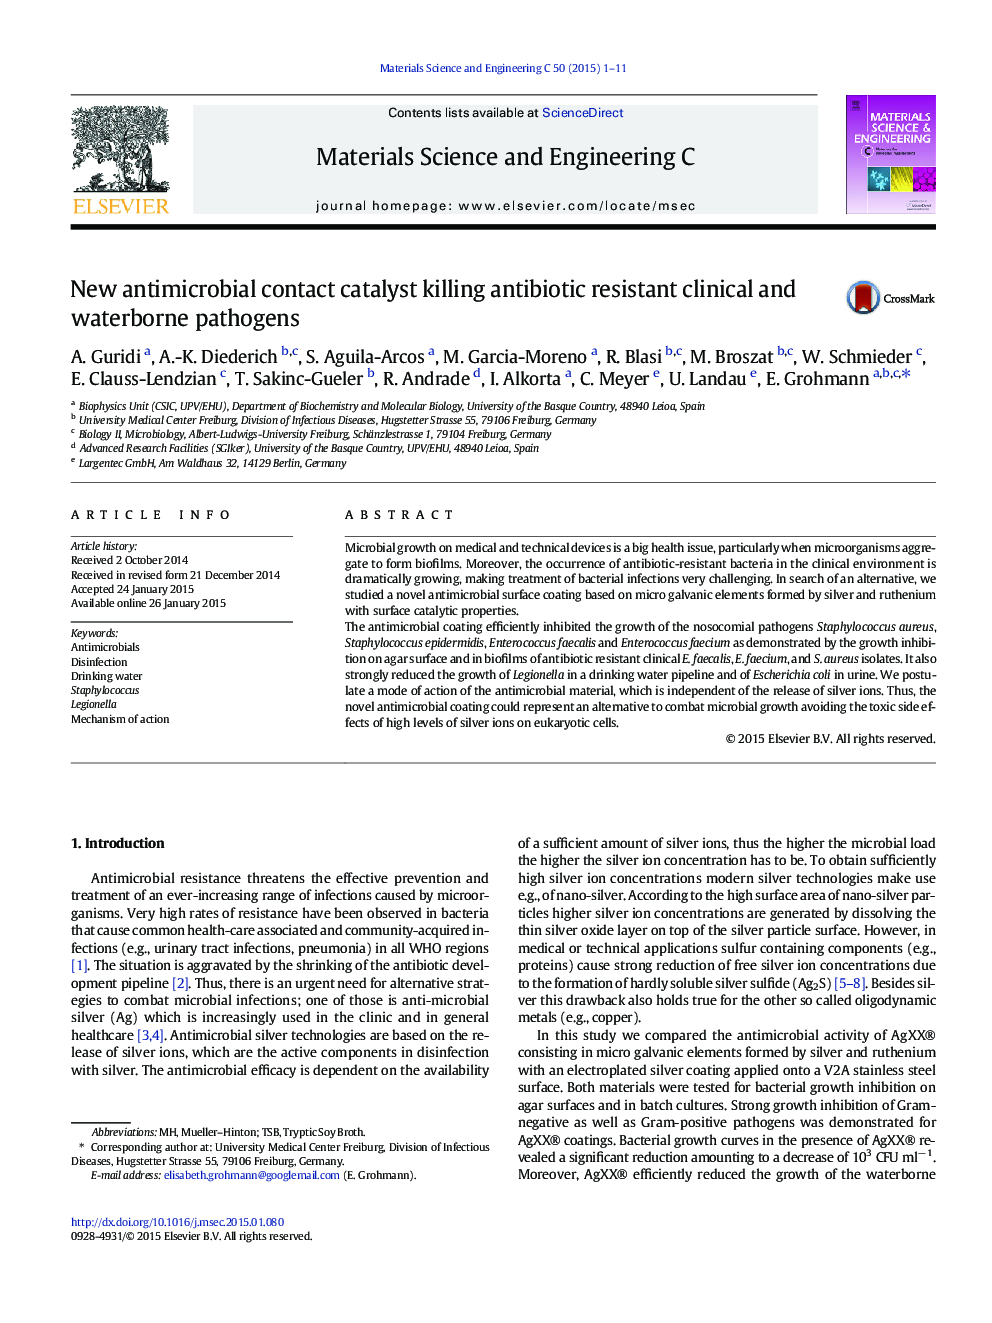 New antimicrobial contact catalyst killing antibiotic resistant clinical and waterborne pathogens